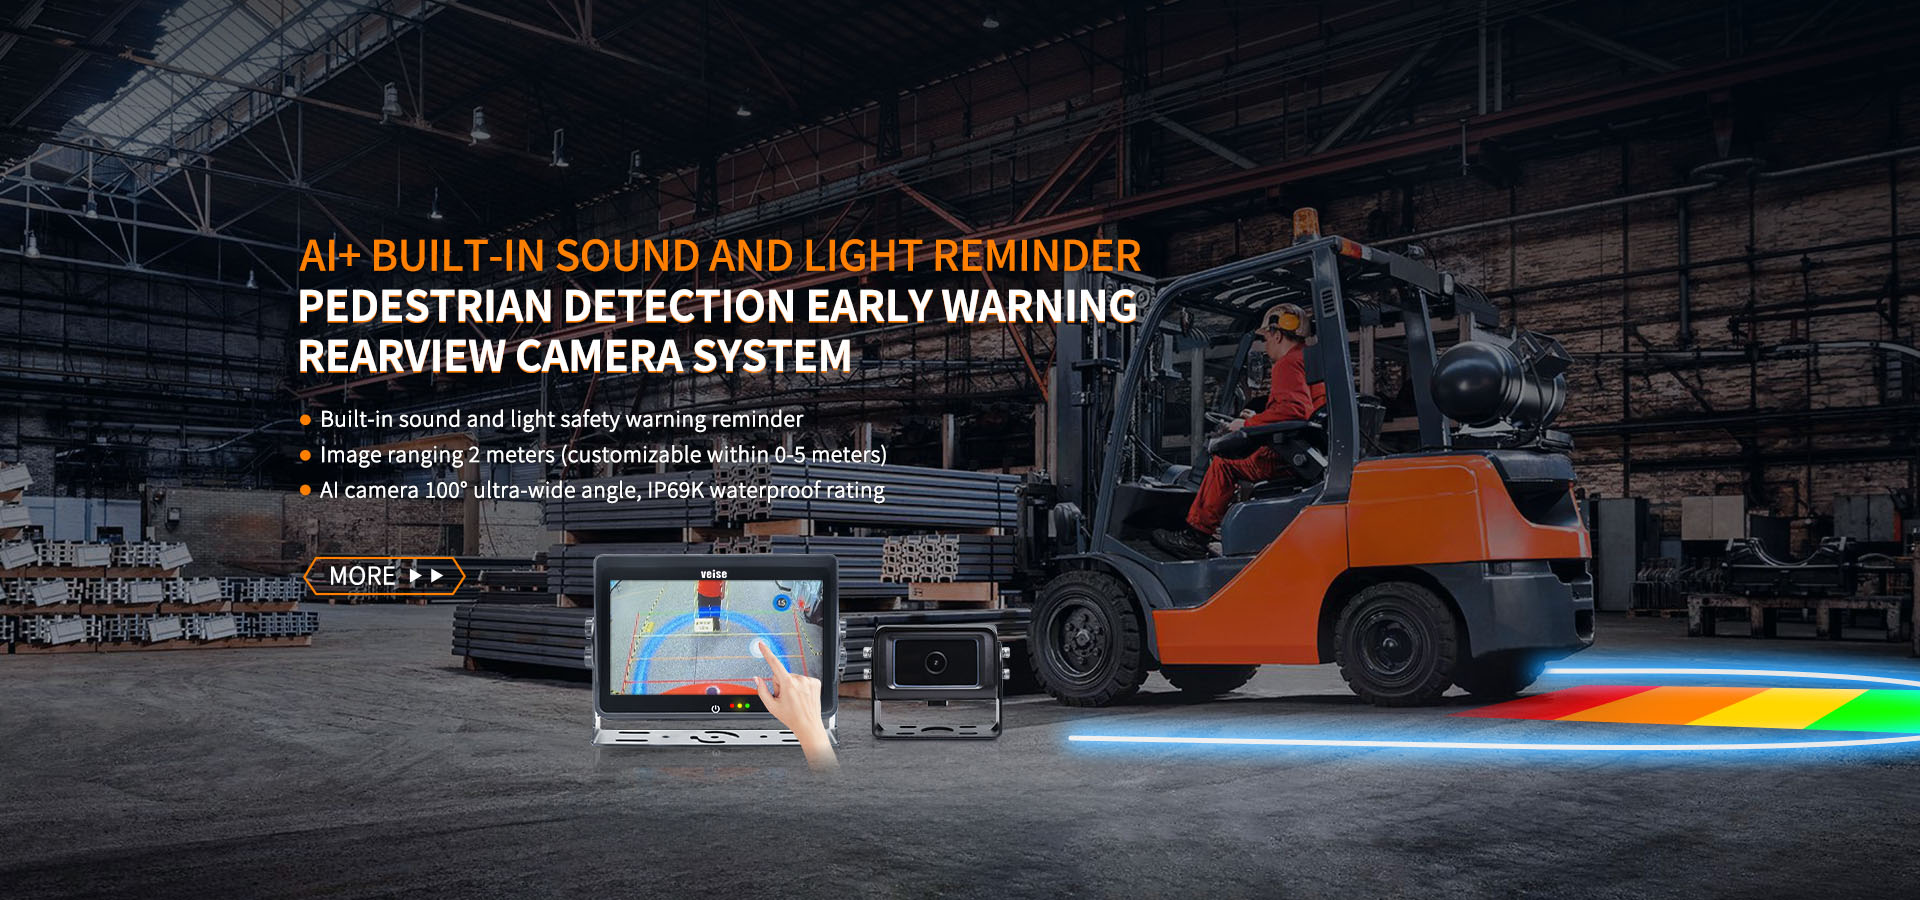 Pedestrian Detection Early Warning Rearview Camera system